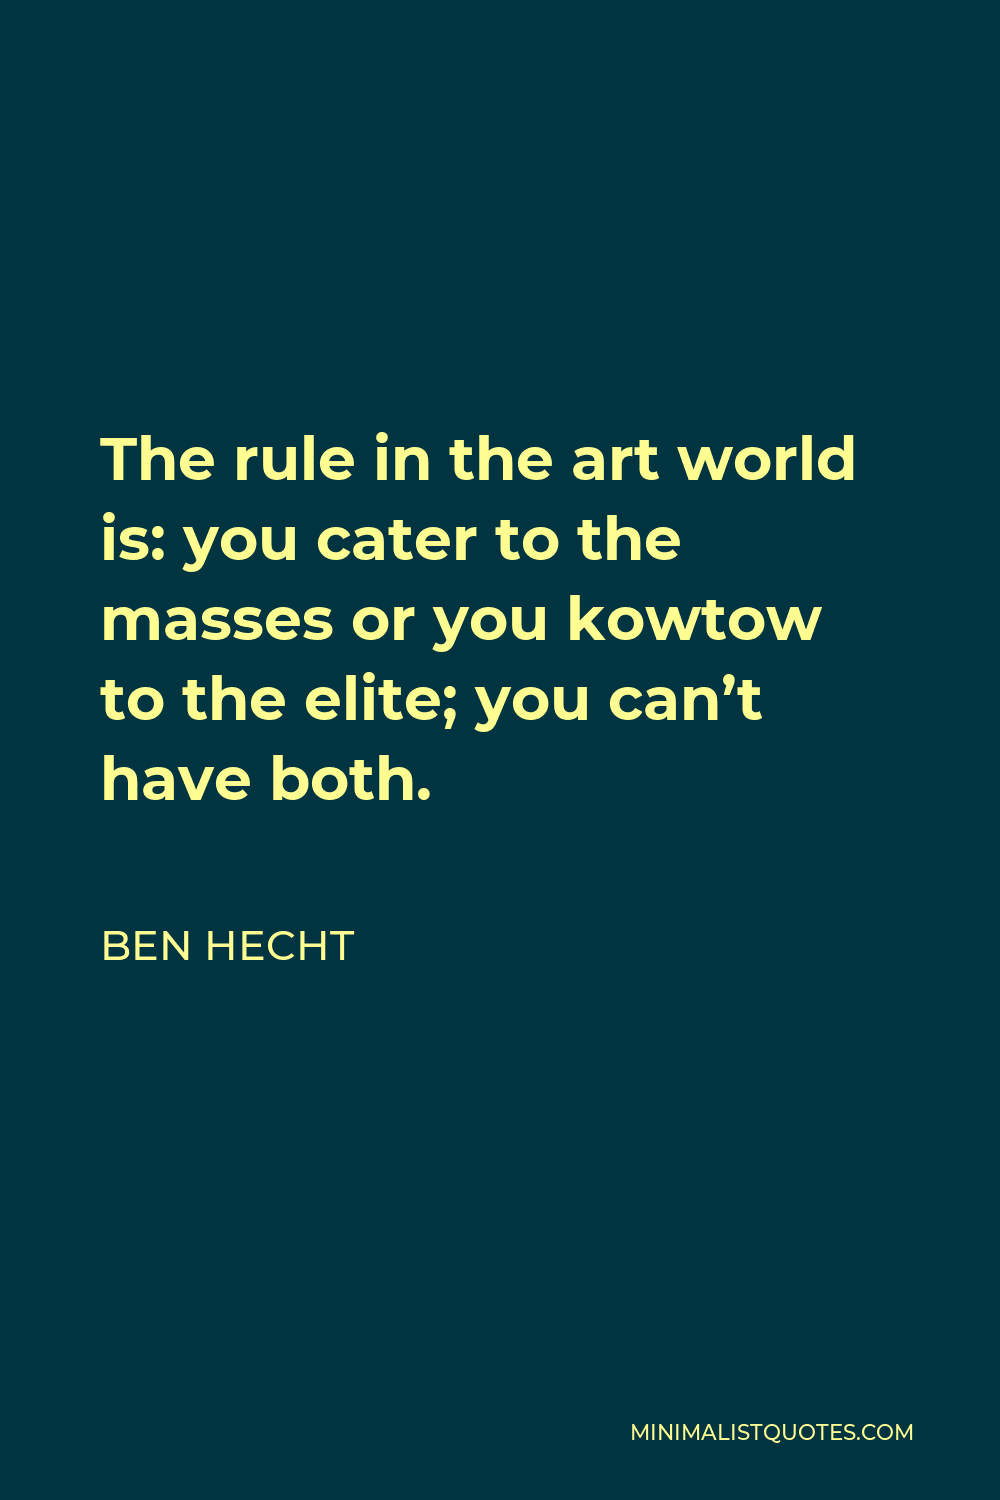 Ben Hecht Quote - The rule in the art world is: you cater to the masses or you kowtow to the elite; you can’t have both.